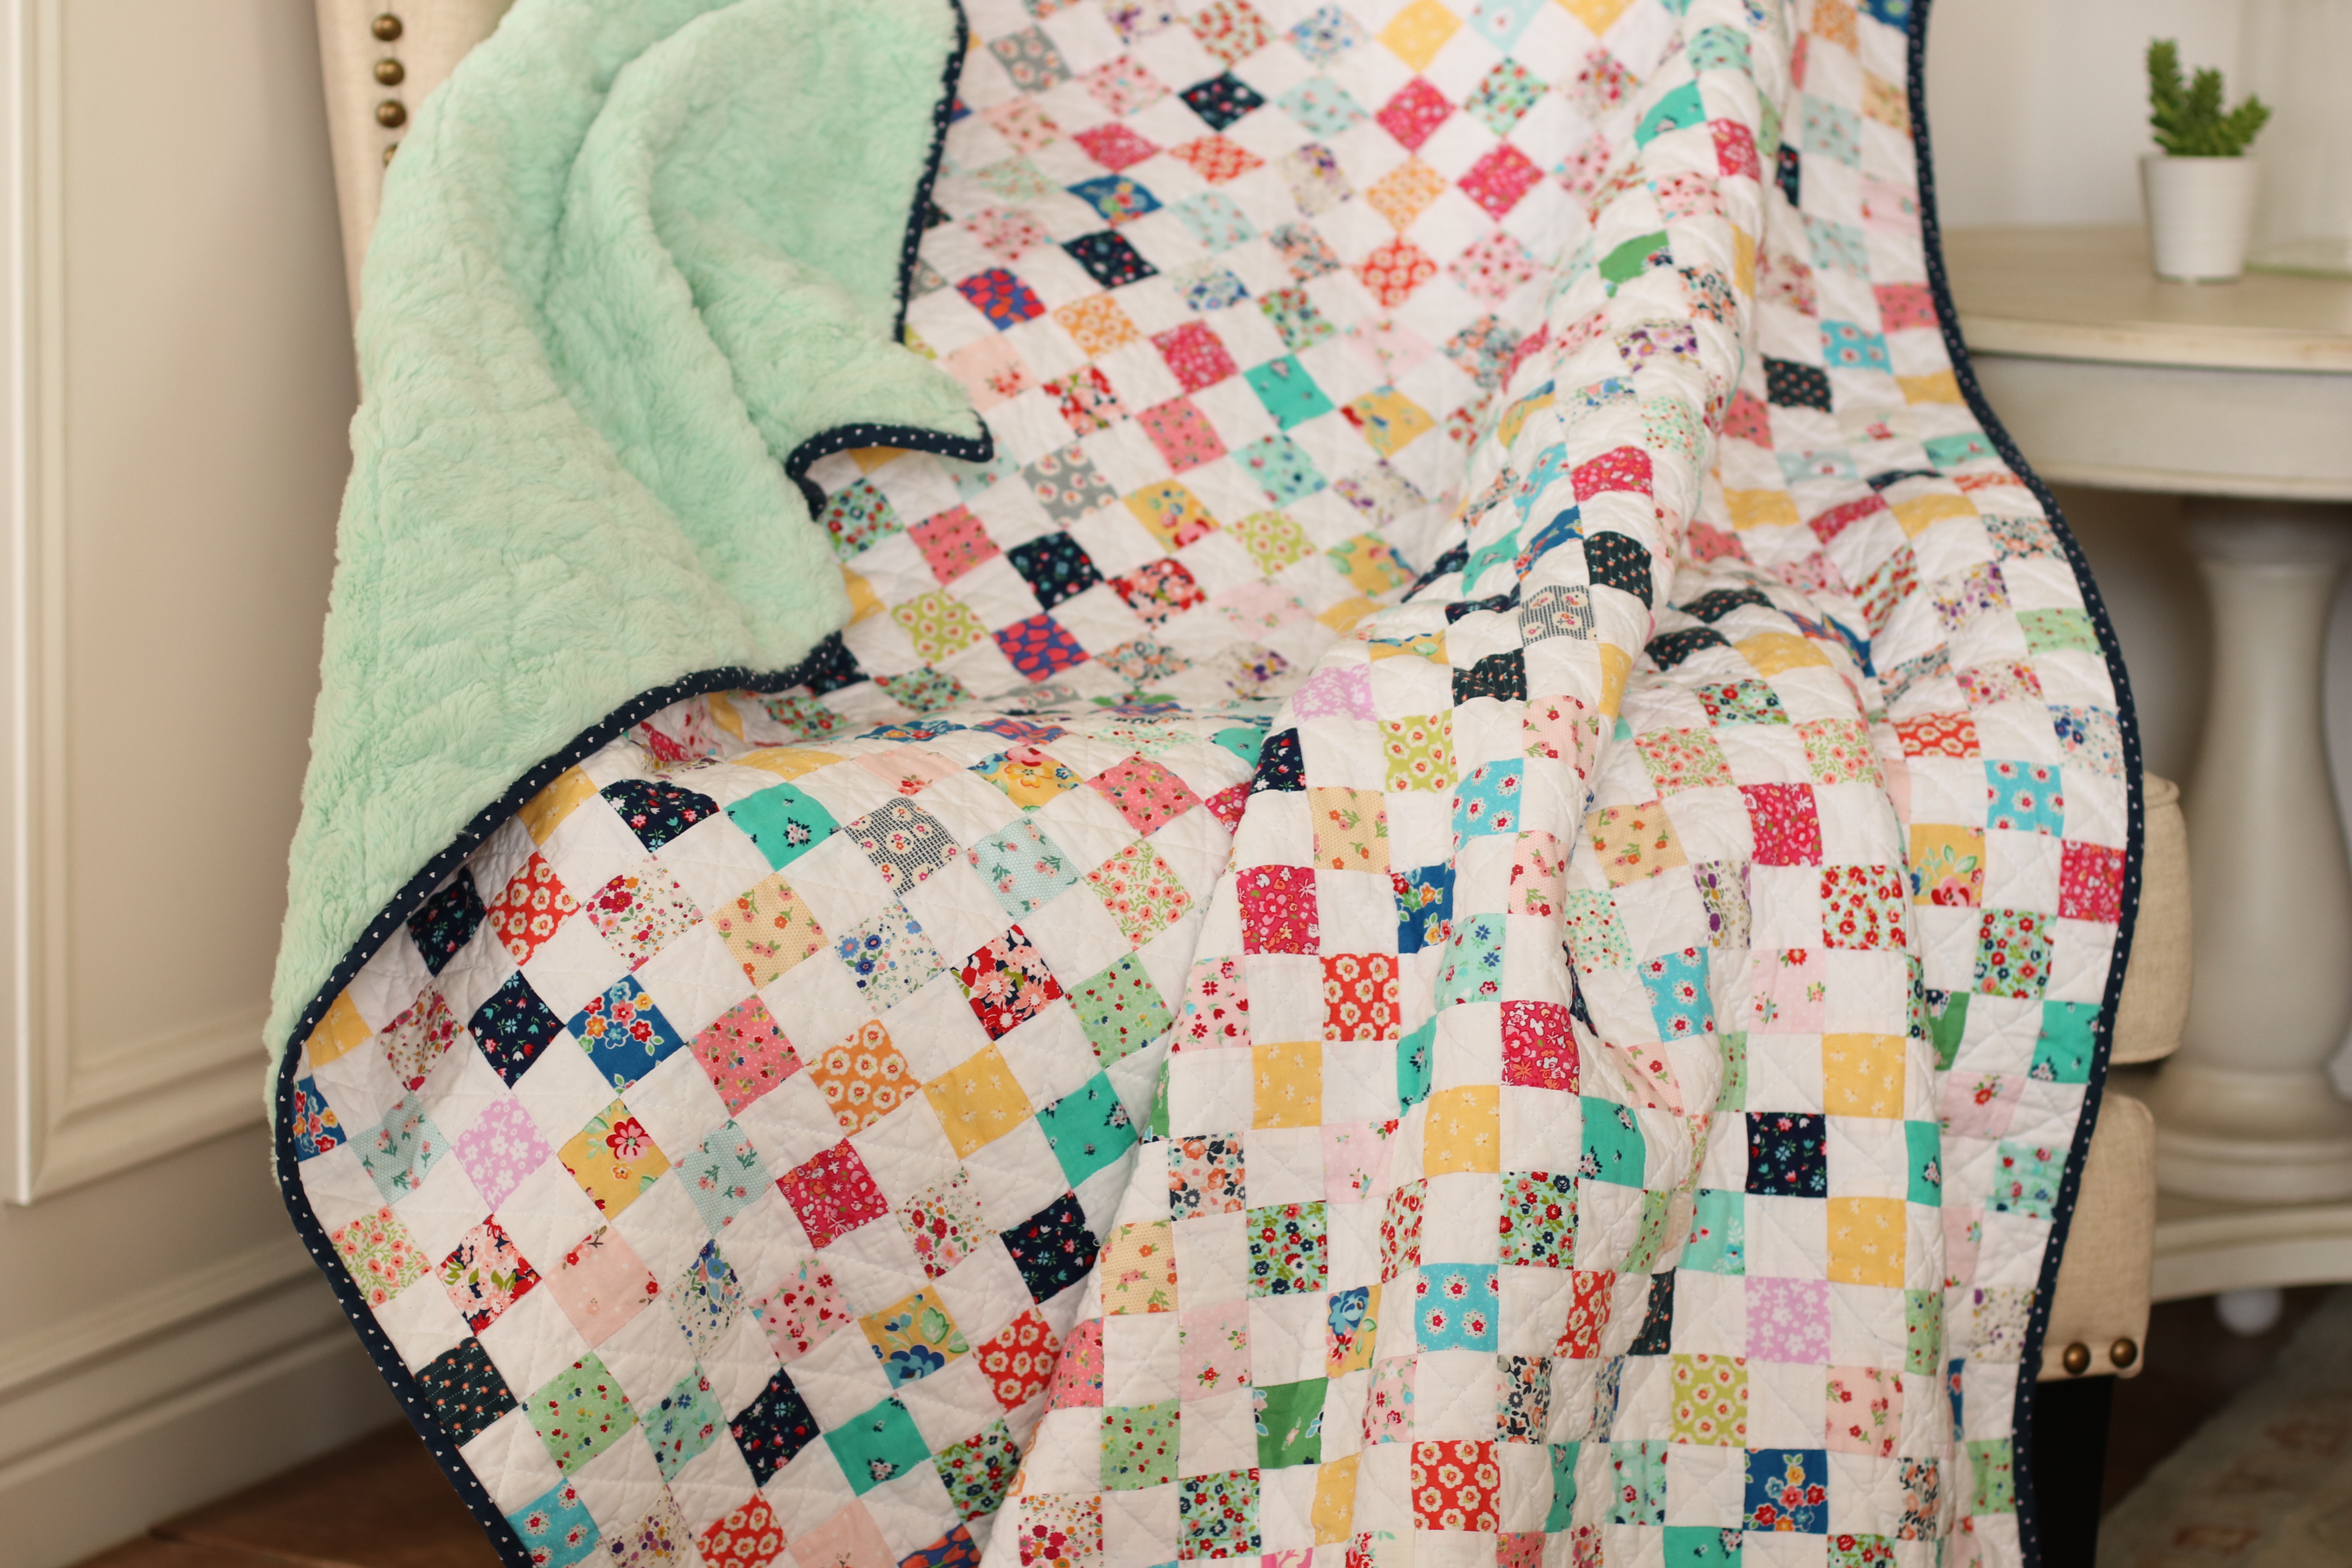 https://cdn2.hubspot.net/hubfs/6407193/Imported_Blog_Media/Quilt-Story-Cuddle-quilt-with-pieced-cotton-front-and-Luxe-Cuddle-Luna-in-Honeydew-for-backing-2.jpg